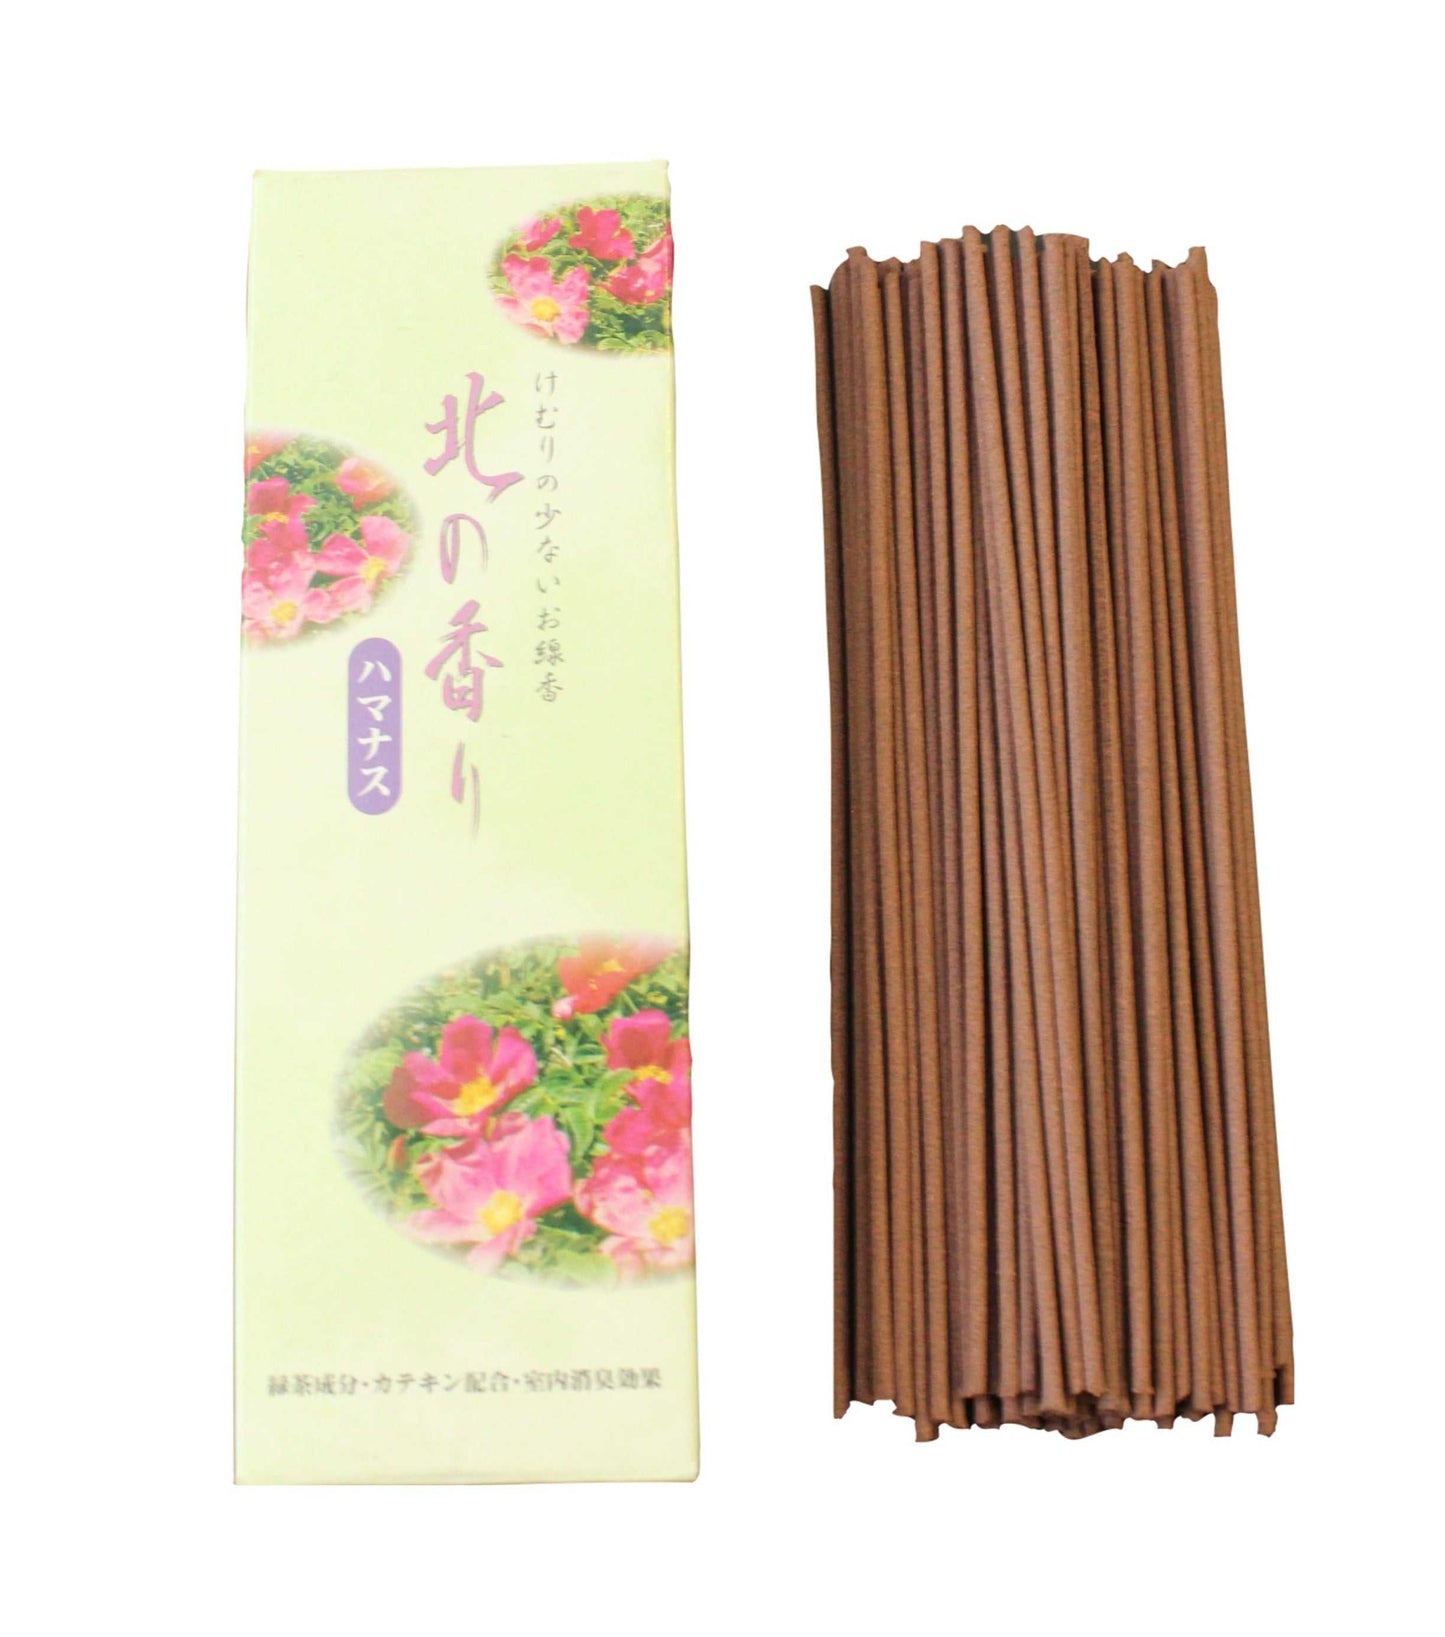 Northern Rose Boxed Incense